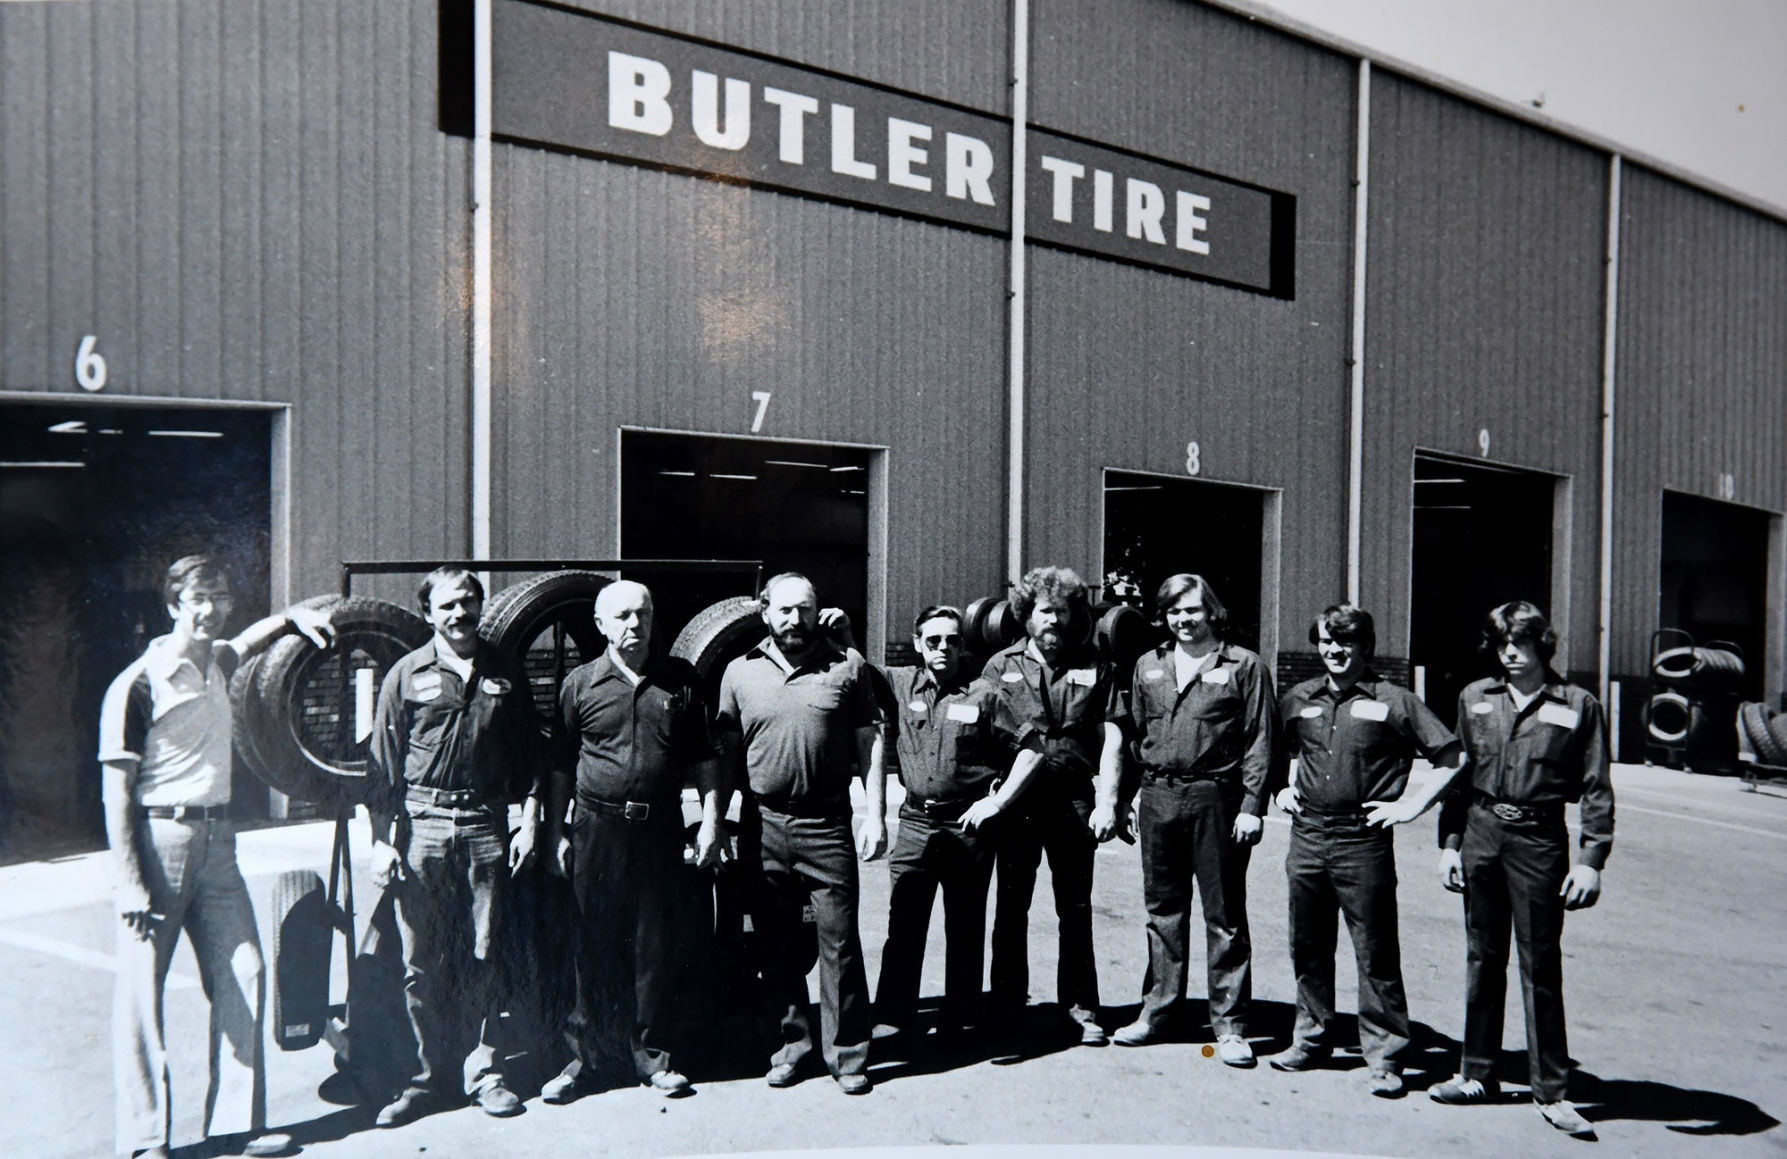 butler tire conyers